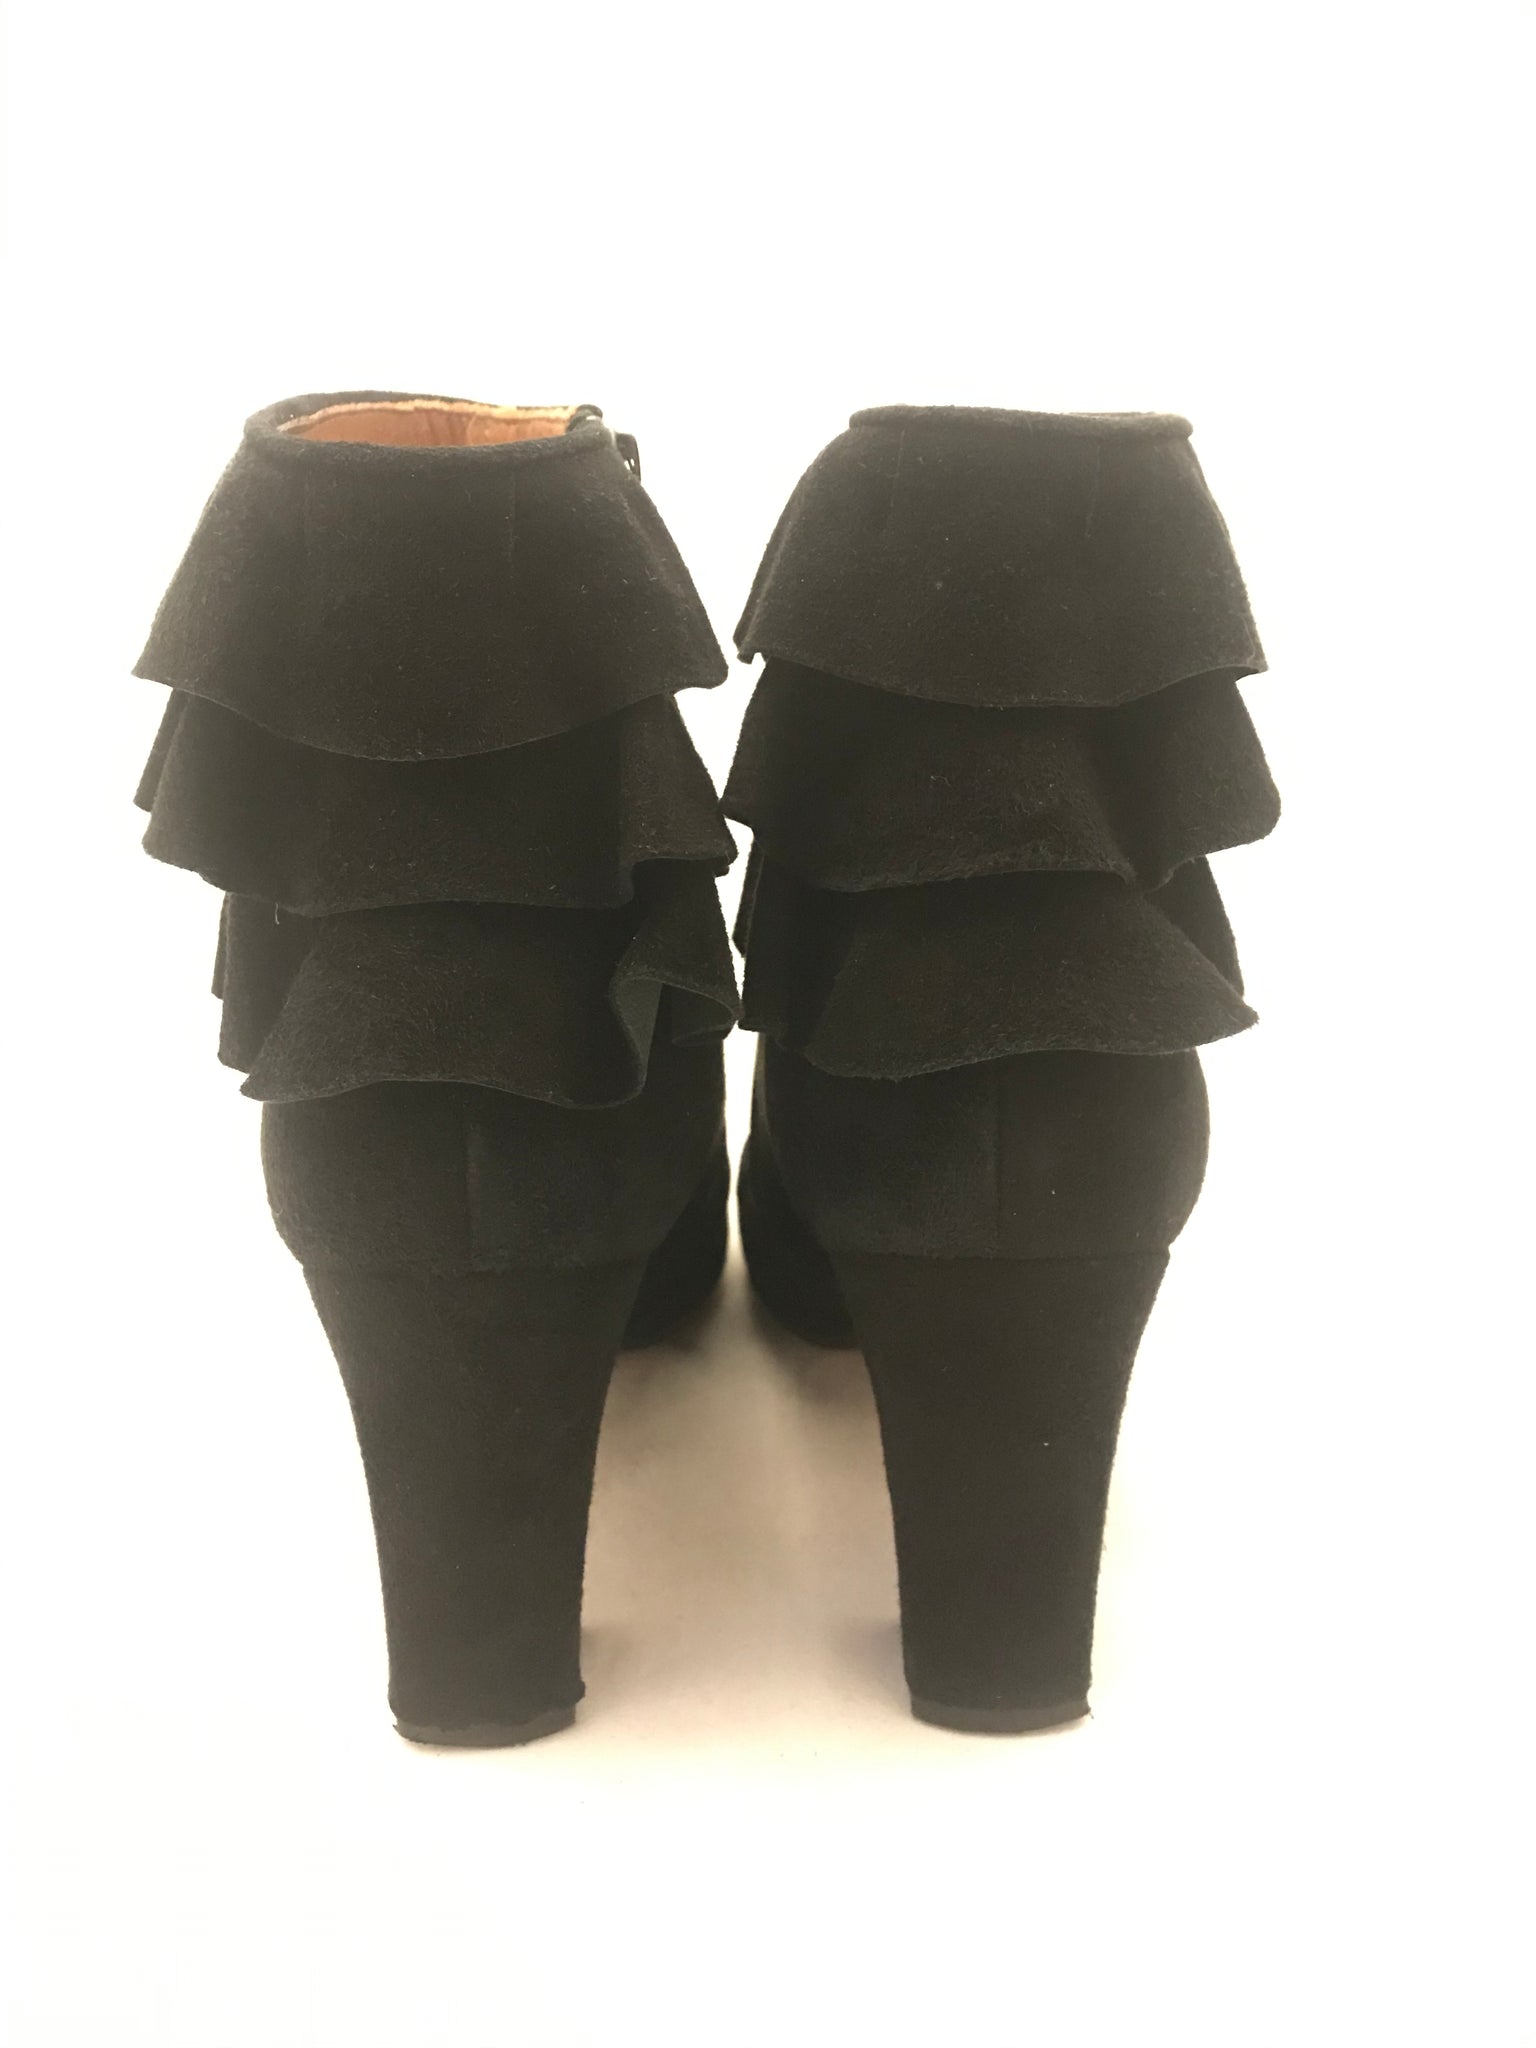 Isabella's Wardrobe Chie Mihara Frilled Suede Ankle Boots.